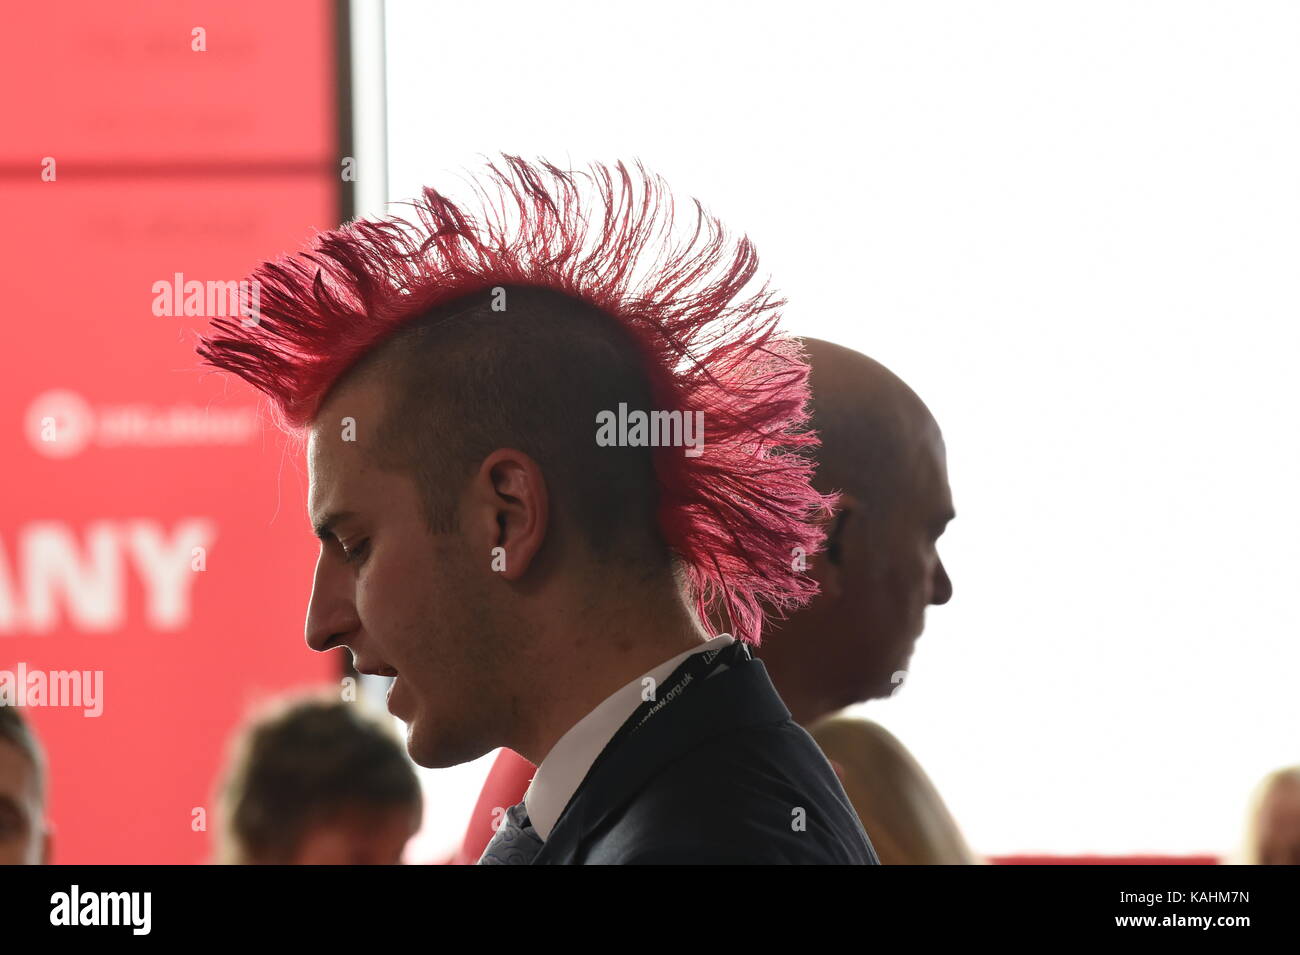 Brighton, UK. 26th Sep, 2017. Red mohican hair style at the Labour Party  Conference in Brighton today Credit: Simon Dack/Alamy Live News Stock Photo  - Alamy